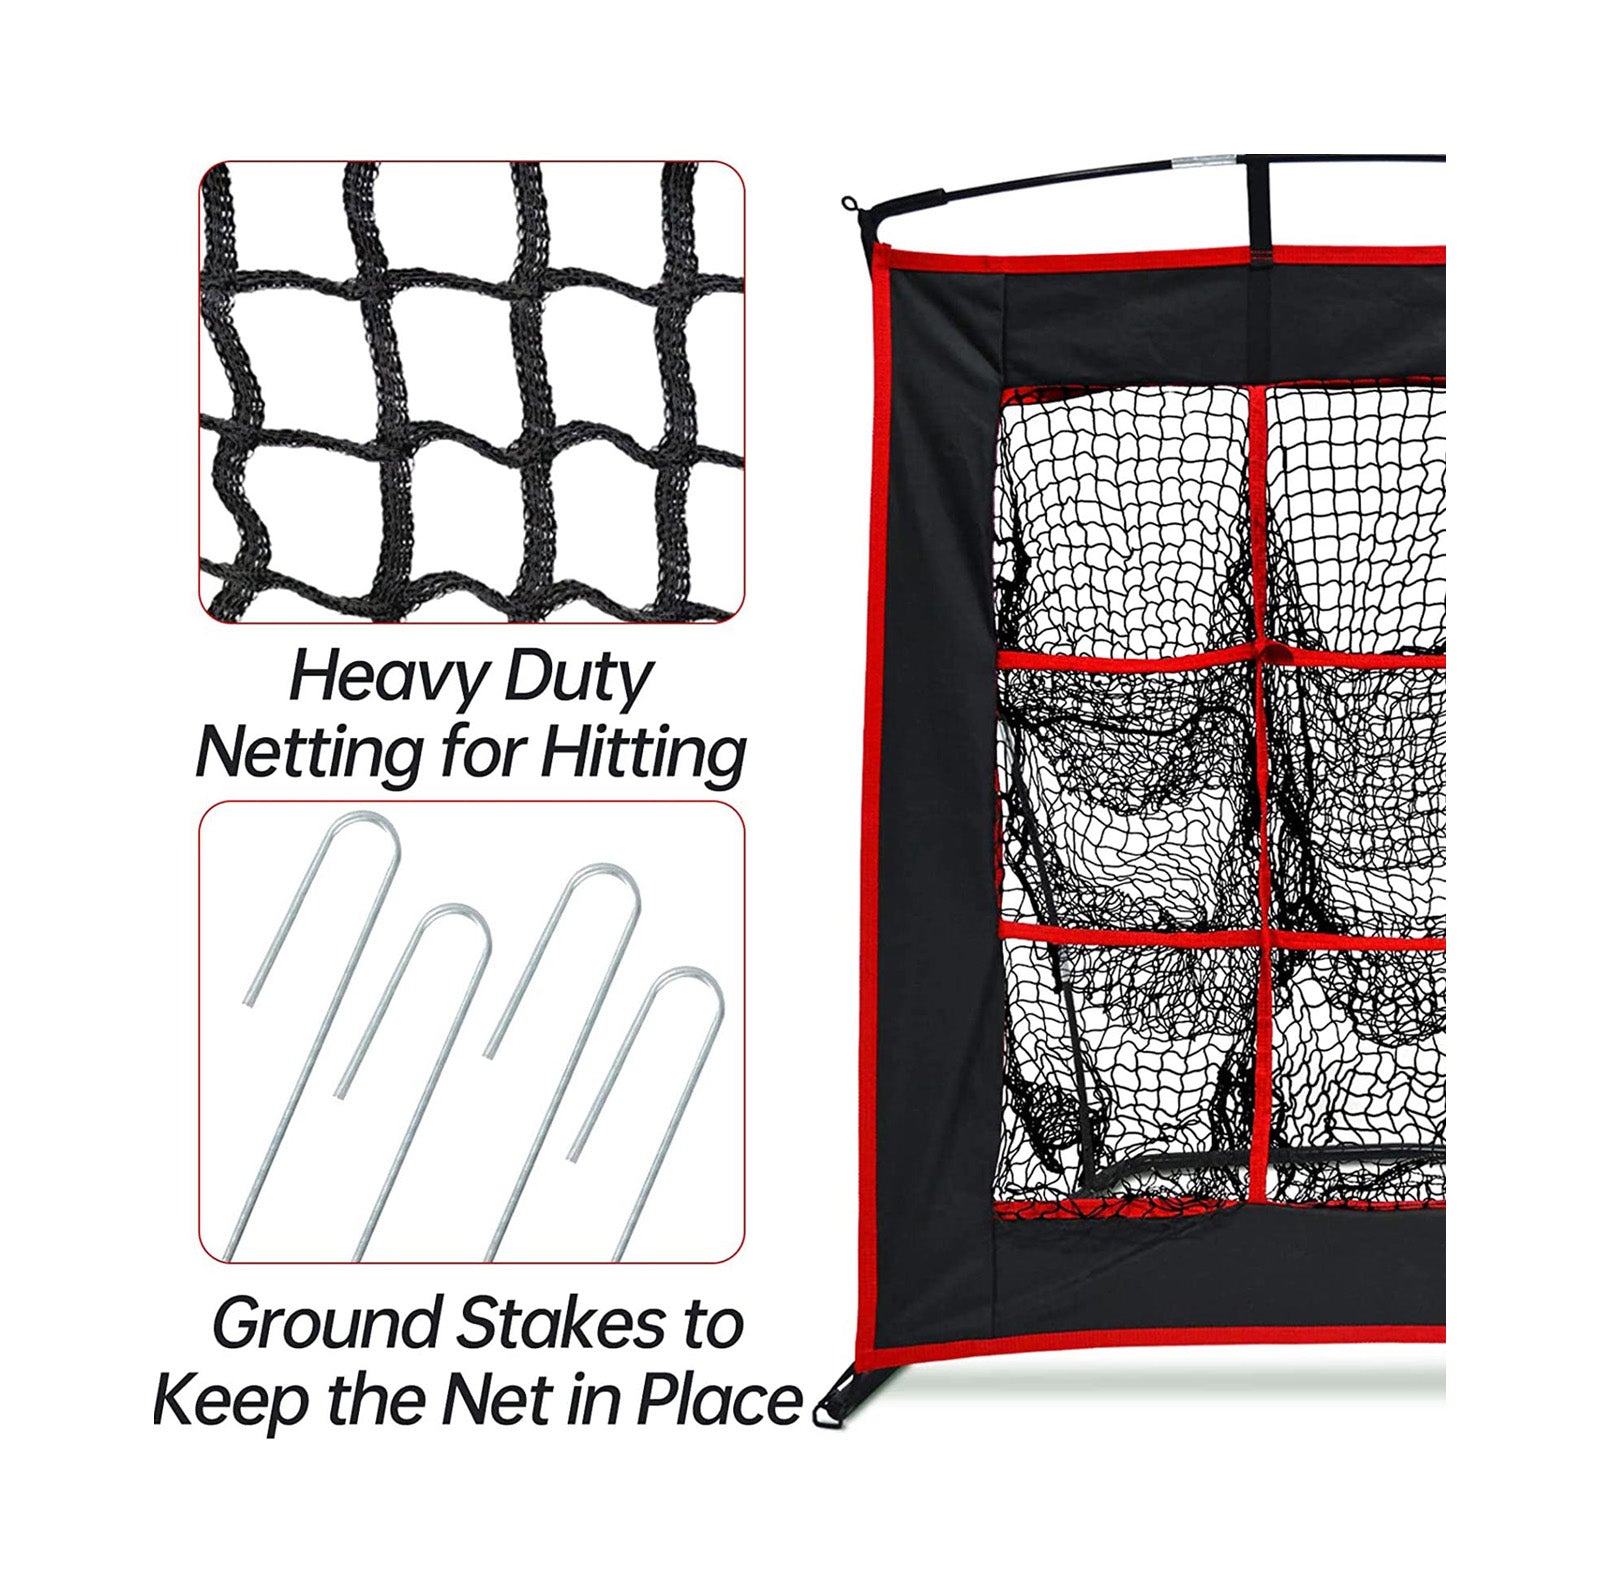 Baseball Softball Pitching Net with Strike Zone, Portable Heavy Duty Steel Frame, 9 Hole Target for Hitting and Pitching